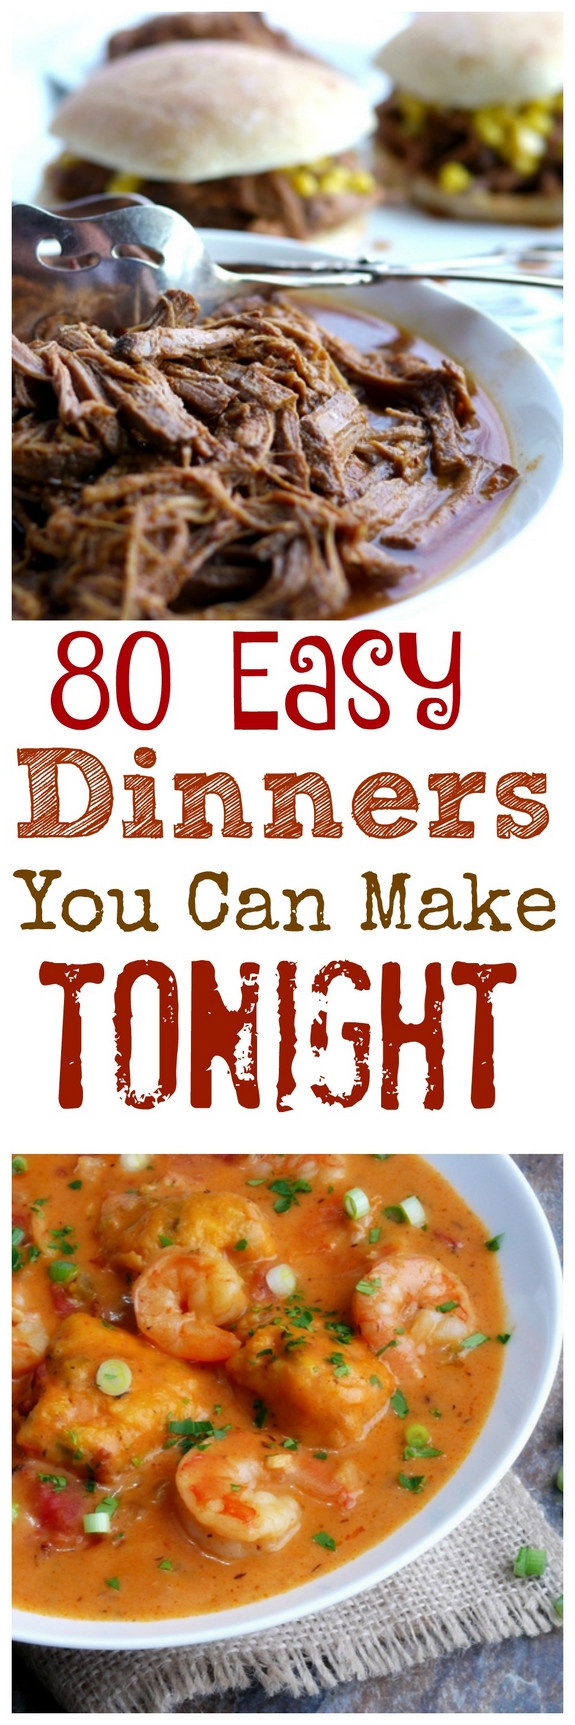 What Can I Make For Dinner Tonight
 80 Easy Dinners You Can Make Tonight